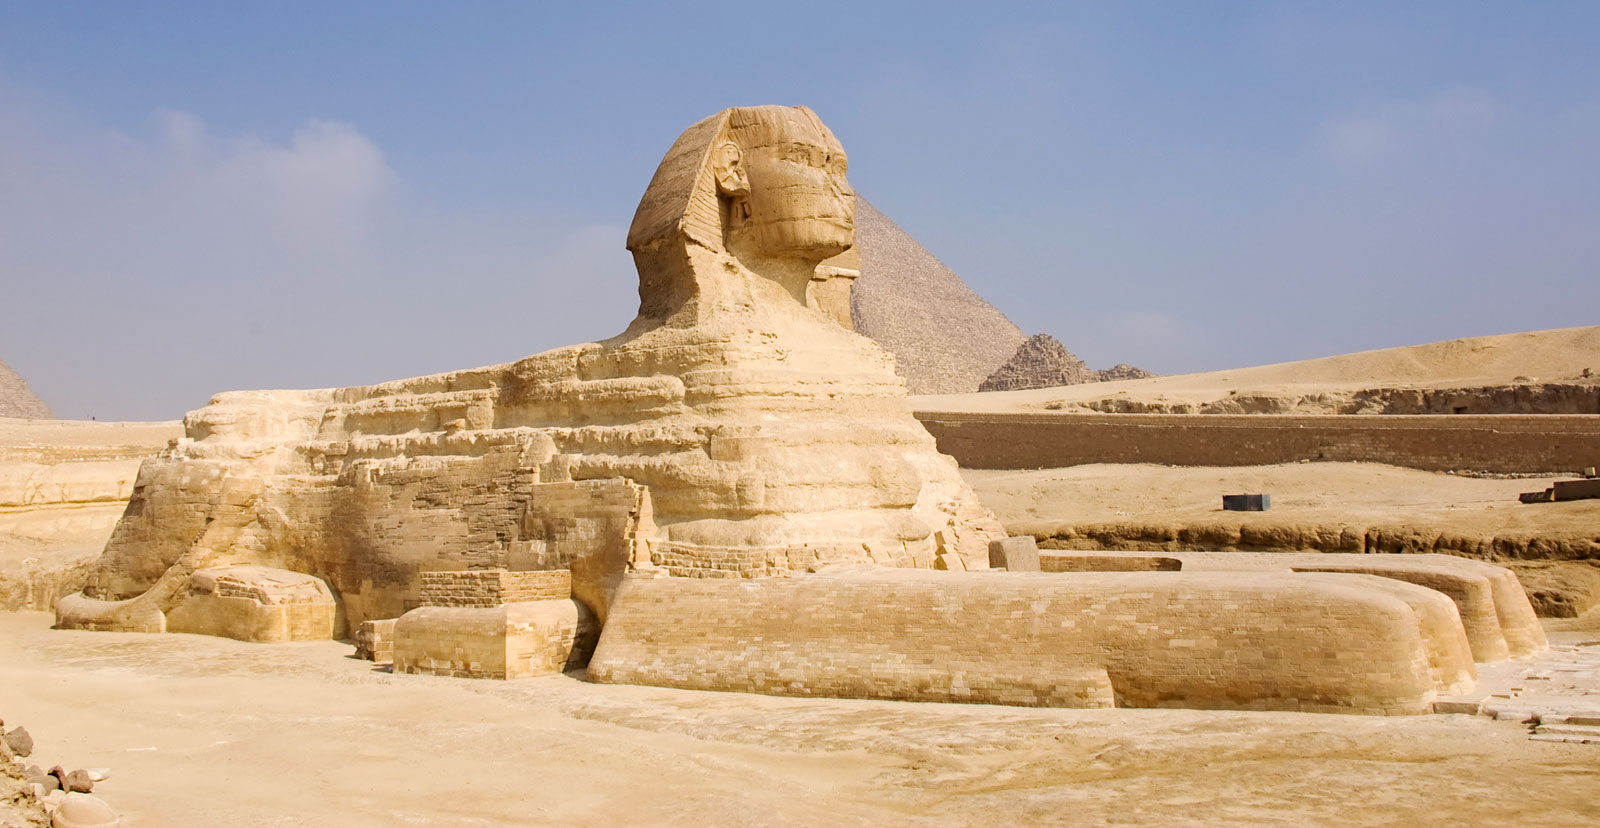 If You Can Name Just 12/20 Countries by Their Famous Landmark, I’ll Be Really Impressed Great Sphinx of Giza in Egypt